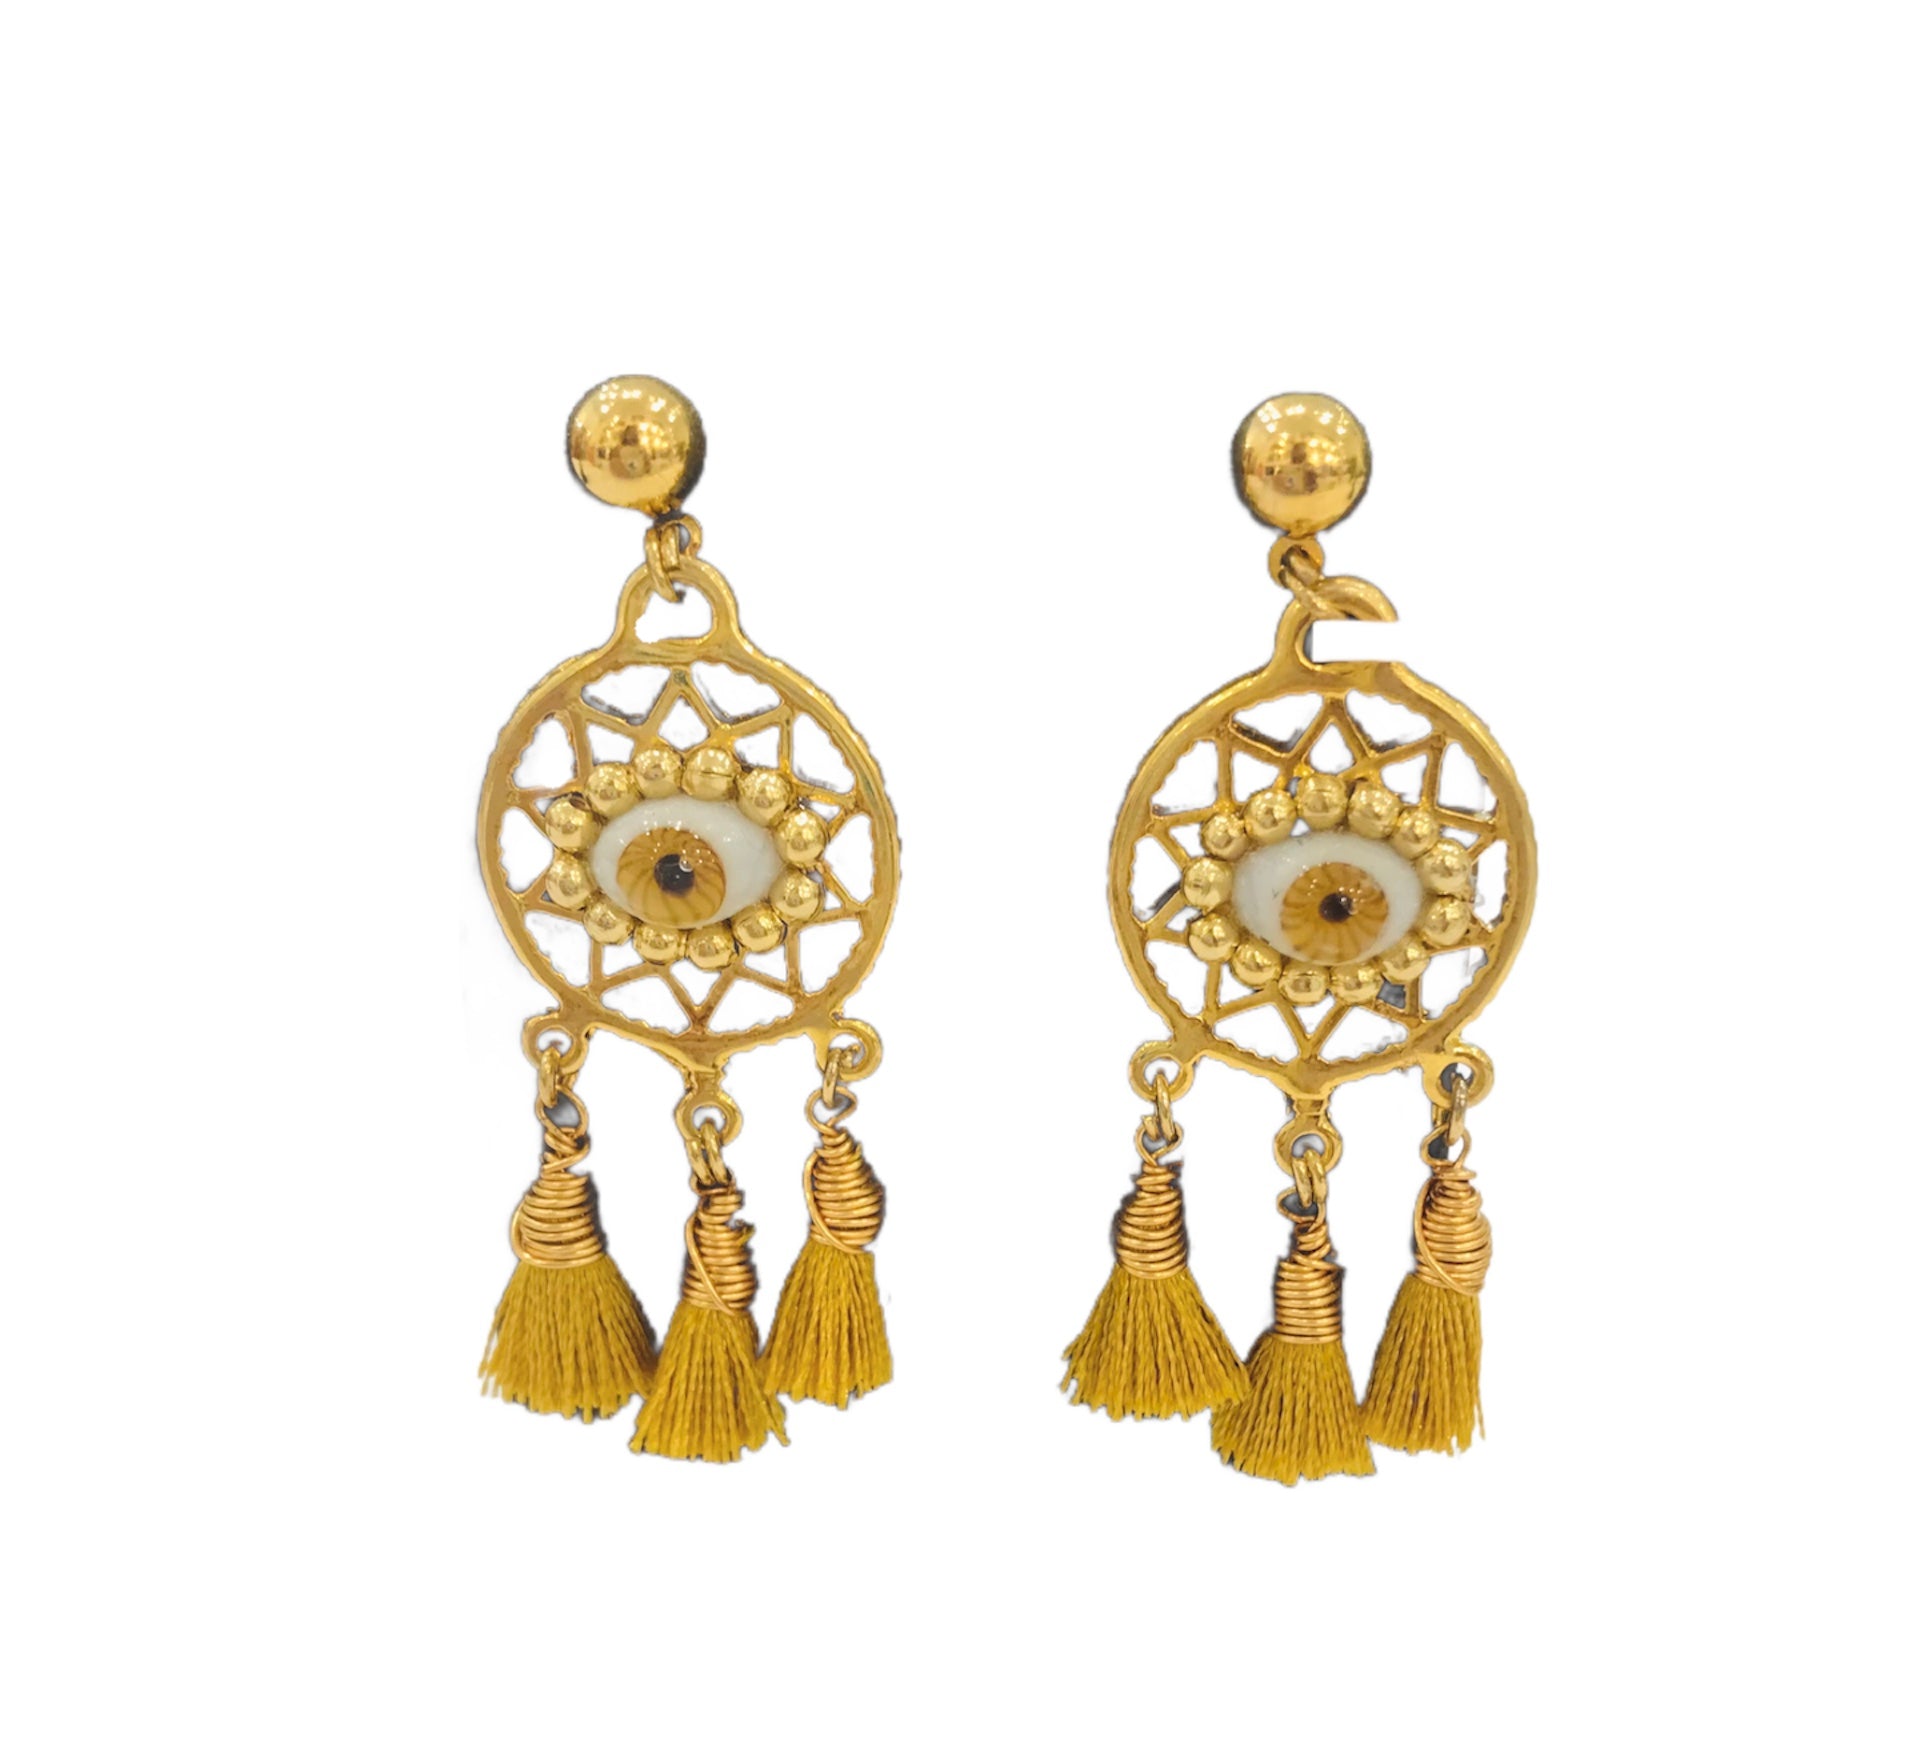 Aggregate more than 242 dream of gold earrings